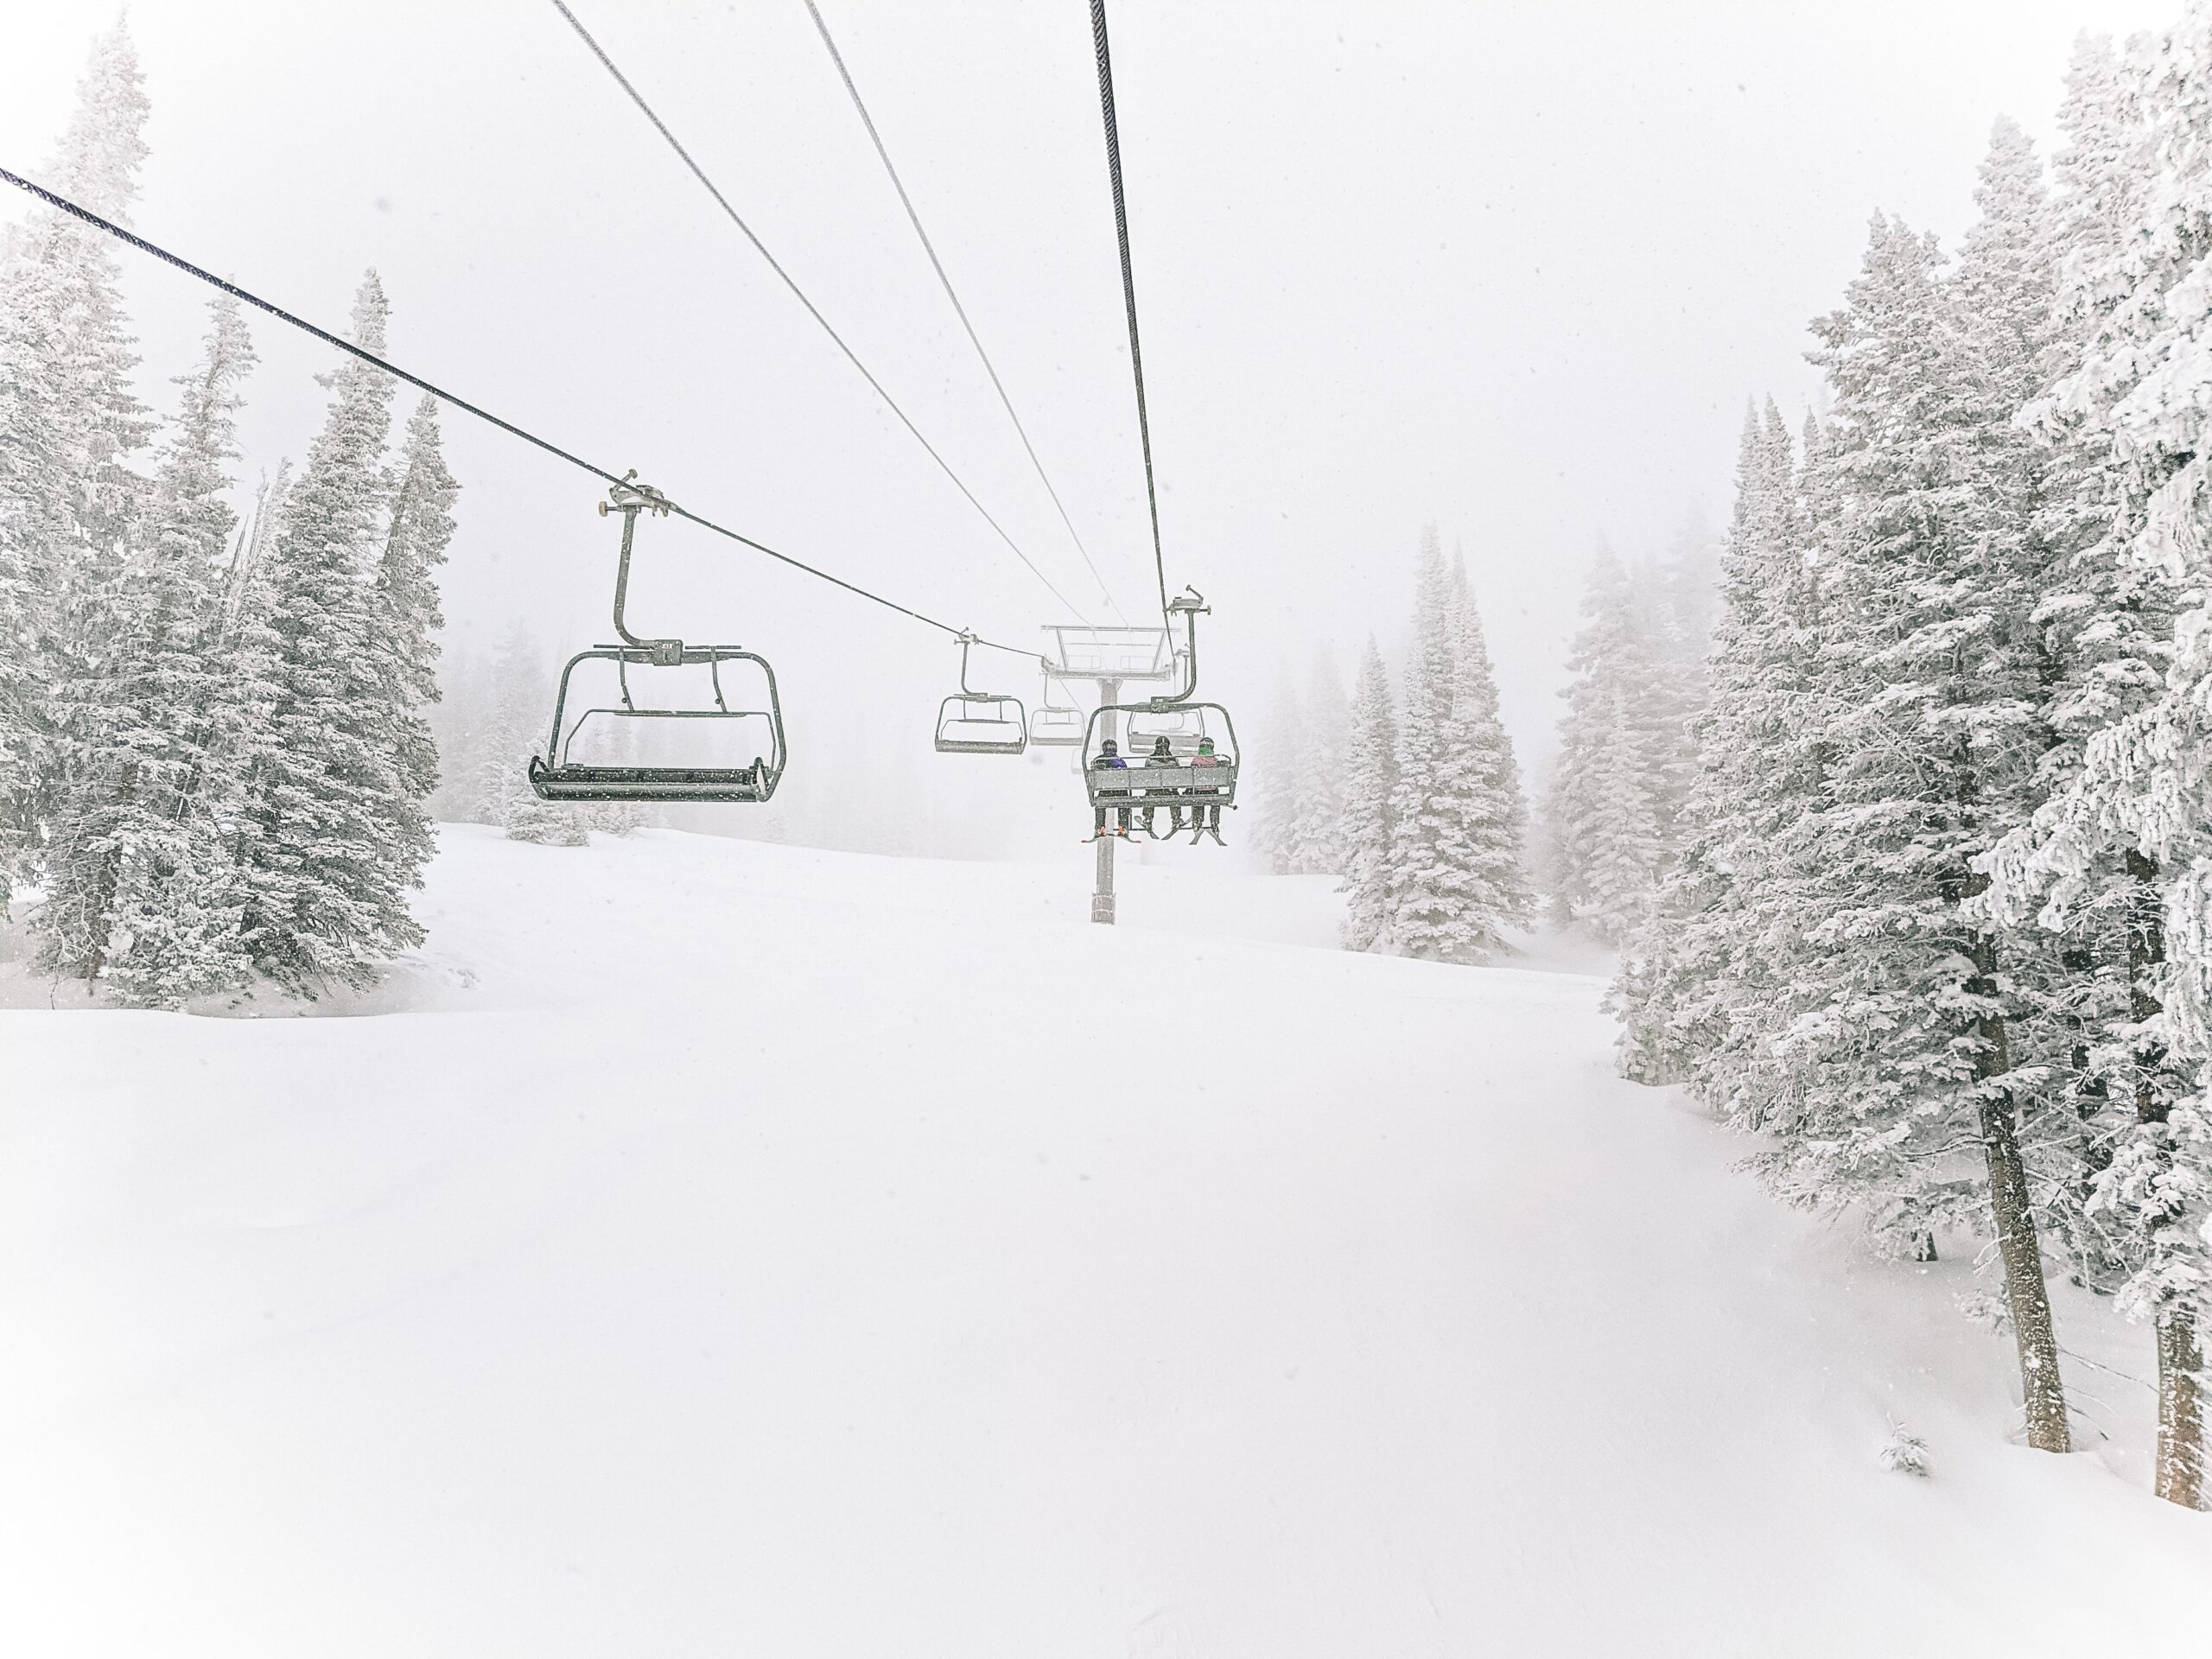 Three skiers sit on a chairlift, over a snowy slope at Steamboat